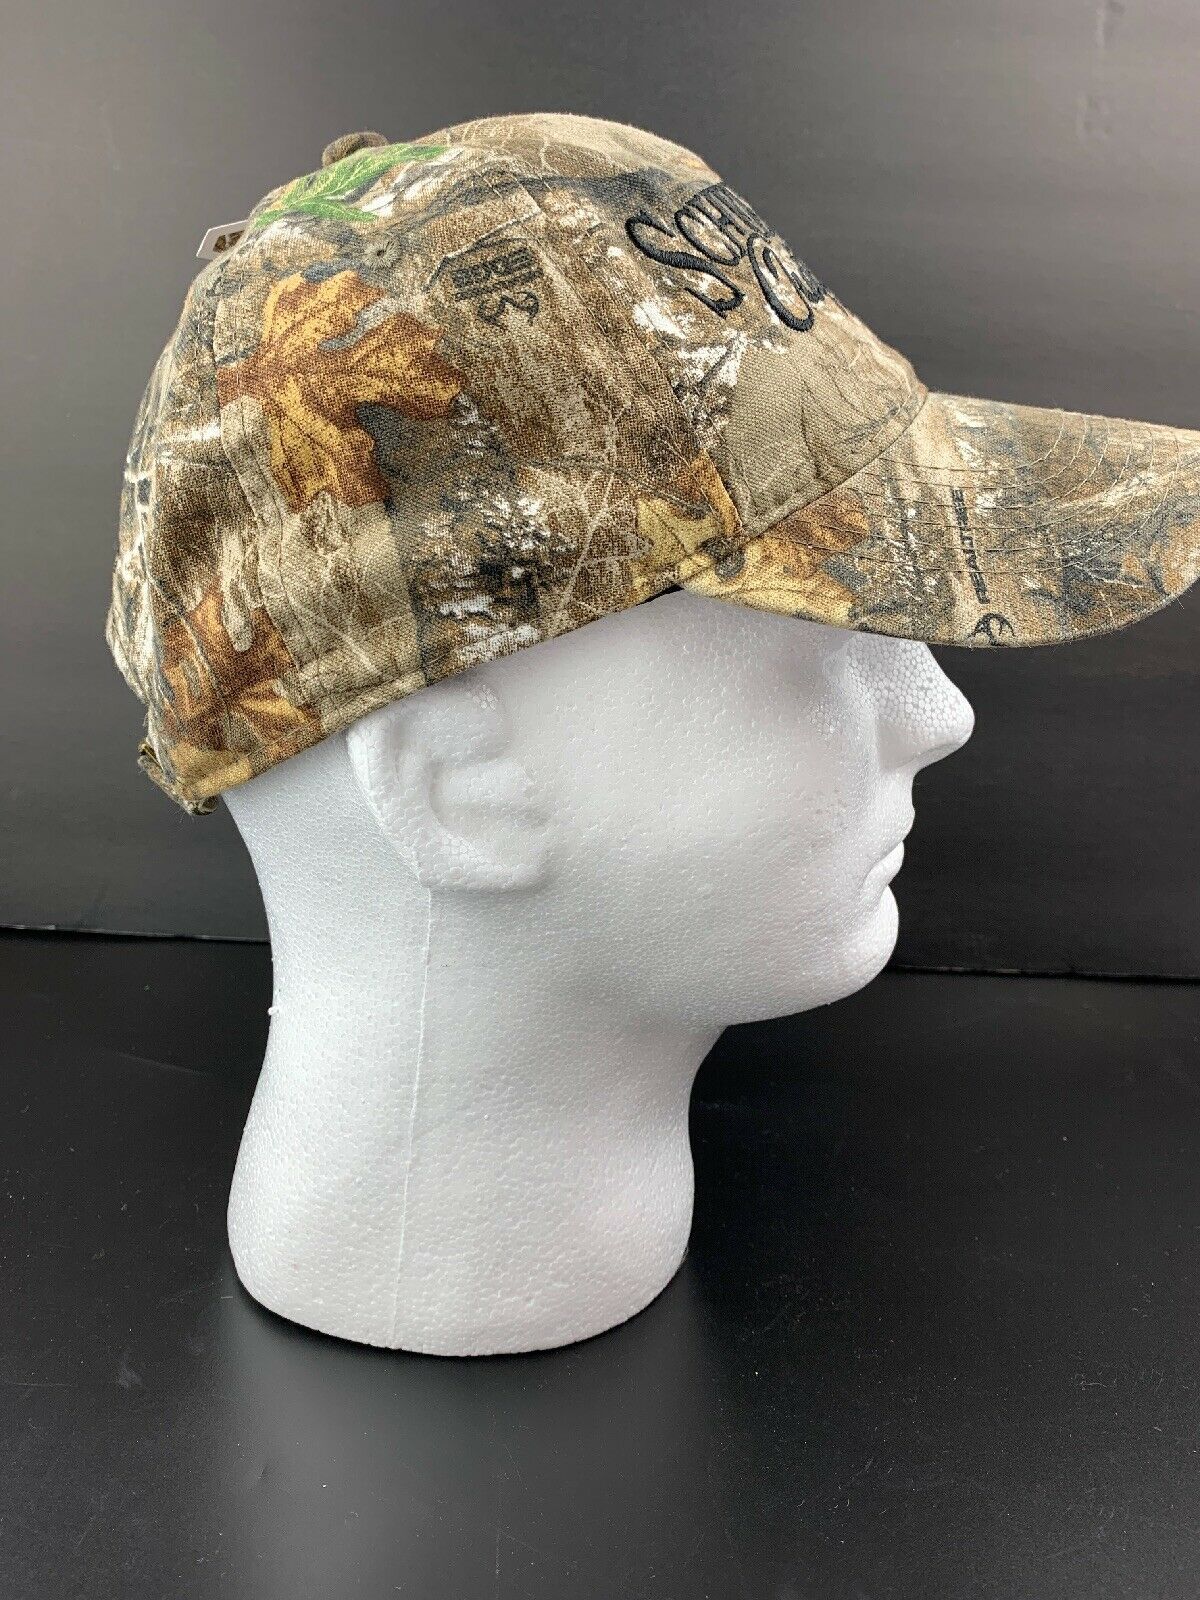 Scheels Outfitters Realtree Edge Camo Adjustable Hat, NWT - Hats